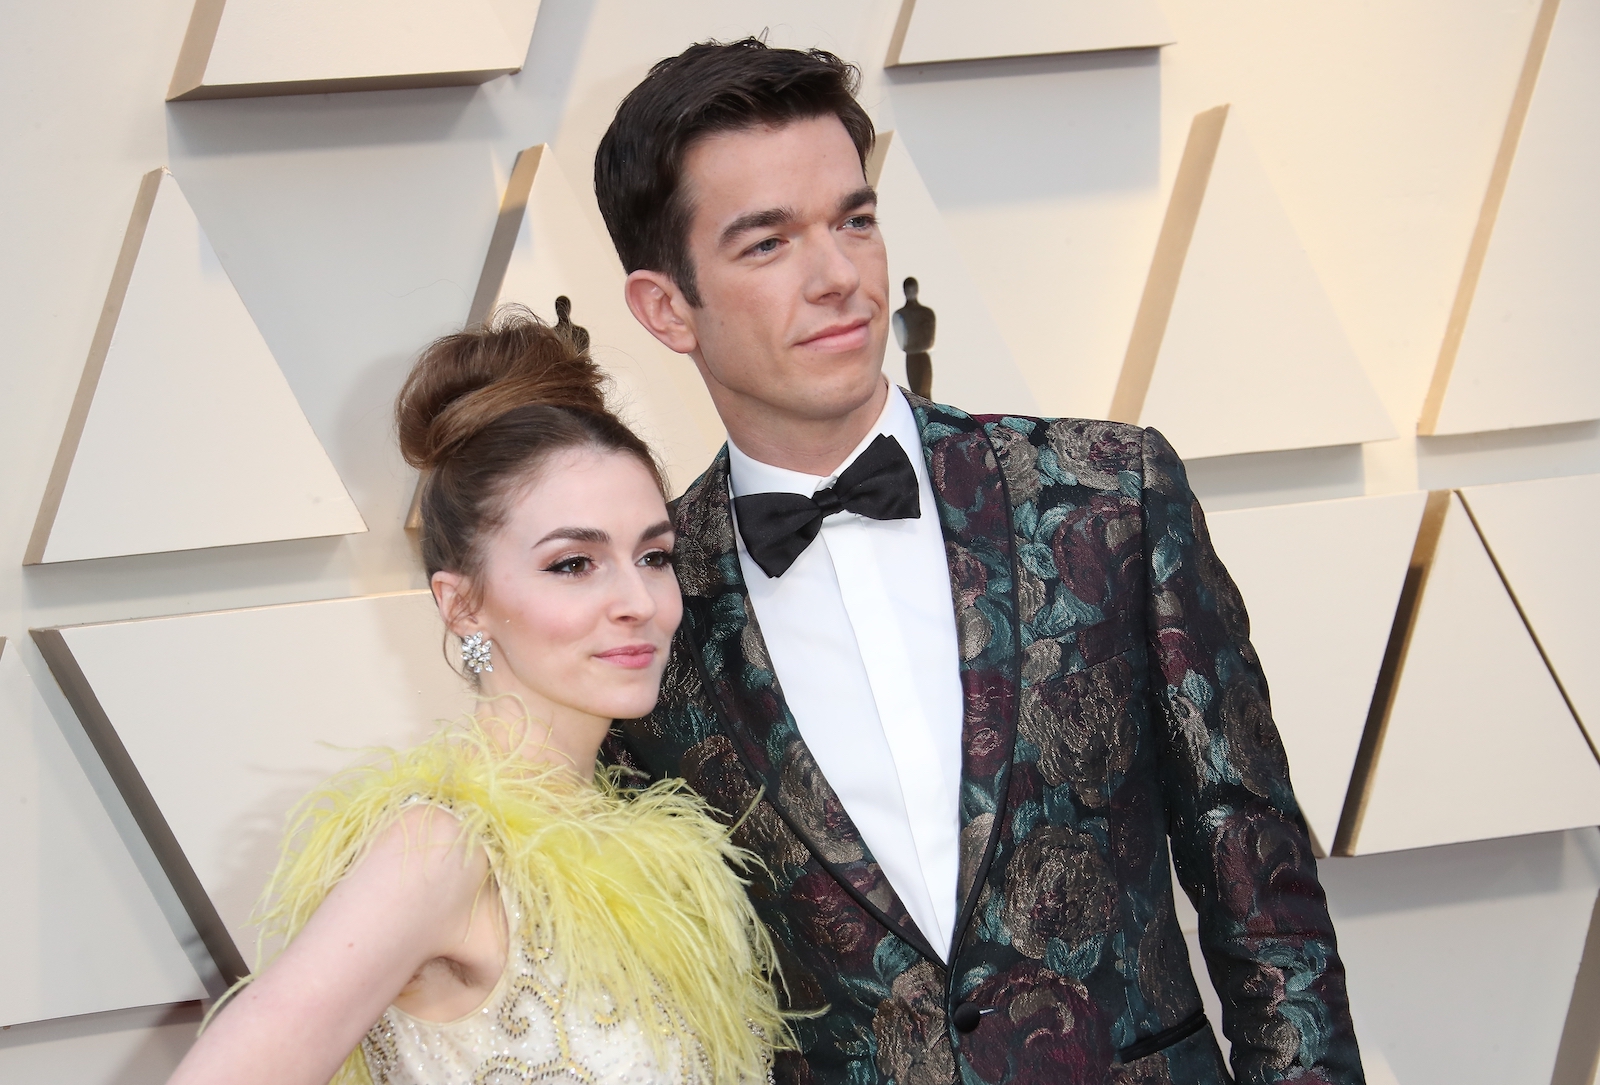 Anna Marie Tendler says she's still in shock after her divorce from John Mulaney